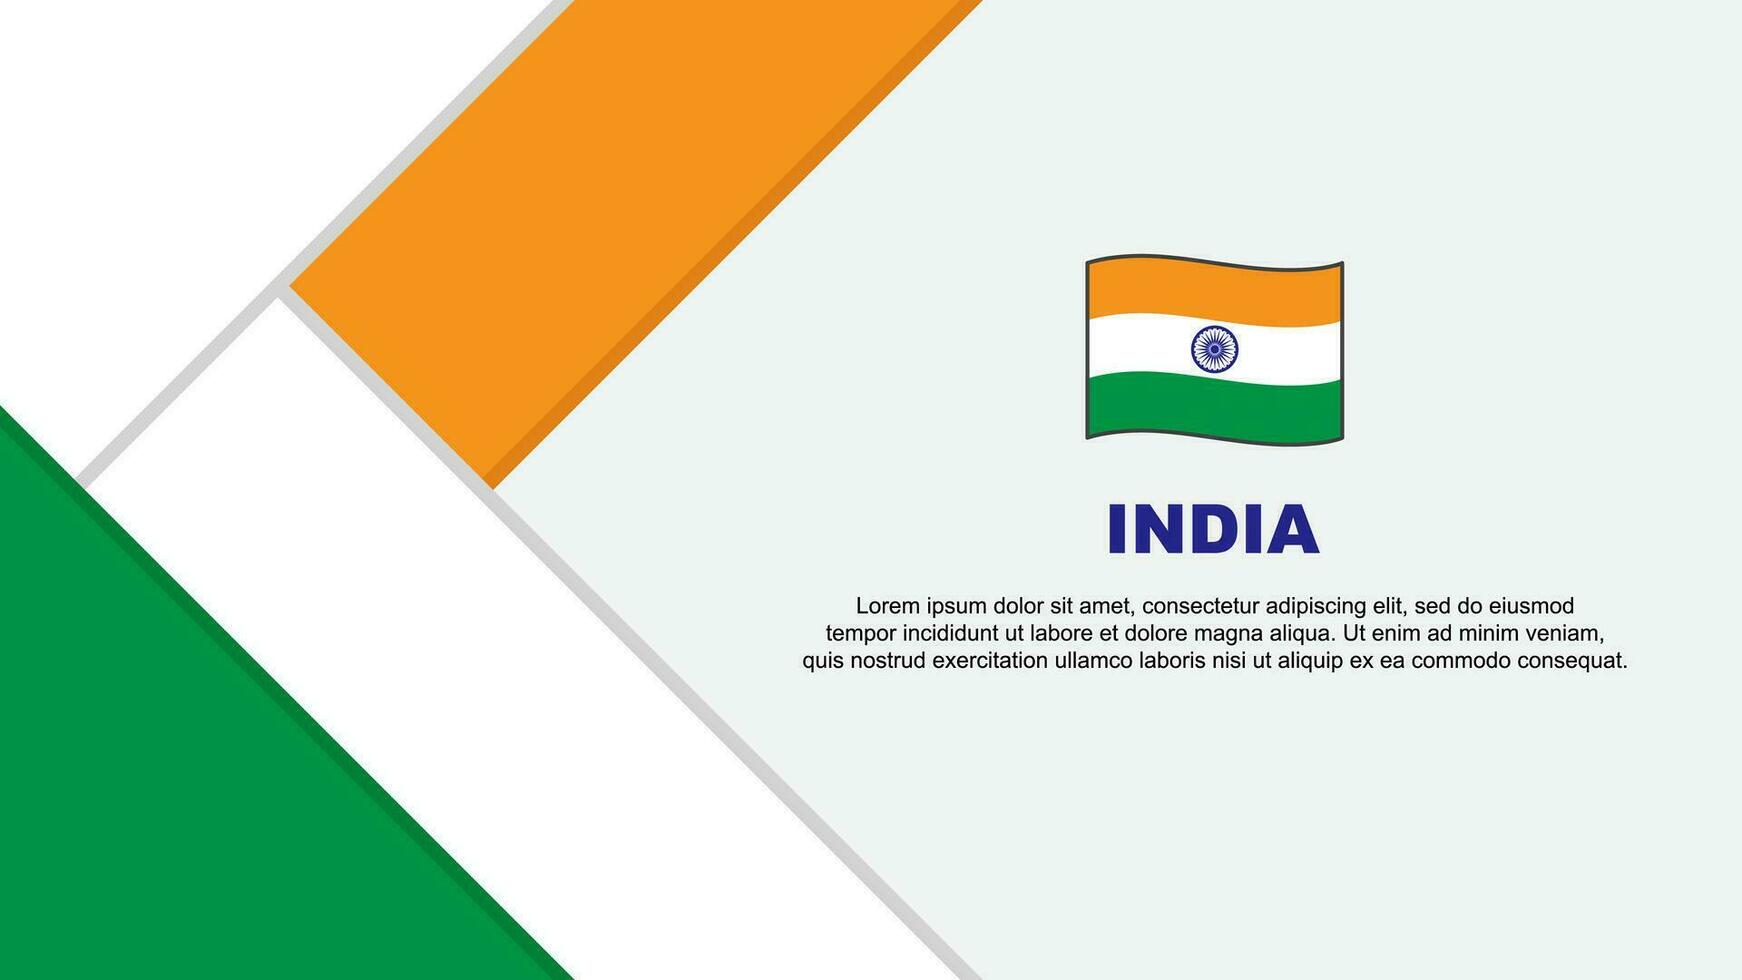 India Flag Abstract Background Design Template. India Independence Day Banner Cartoon Vector Illustration. India Illustration